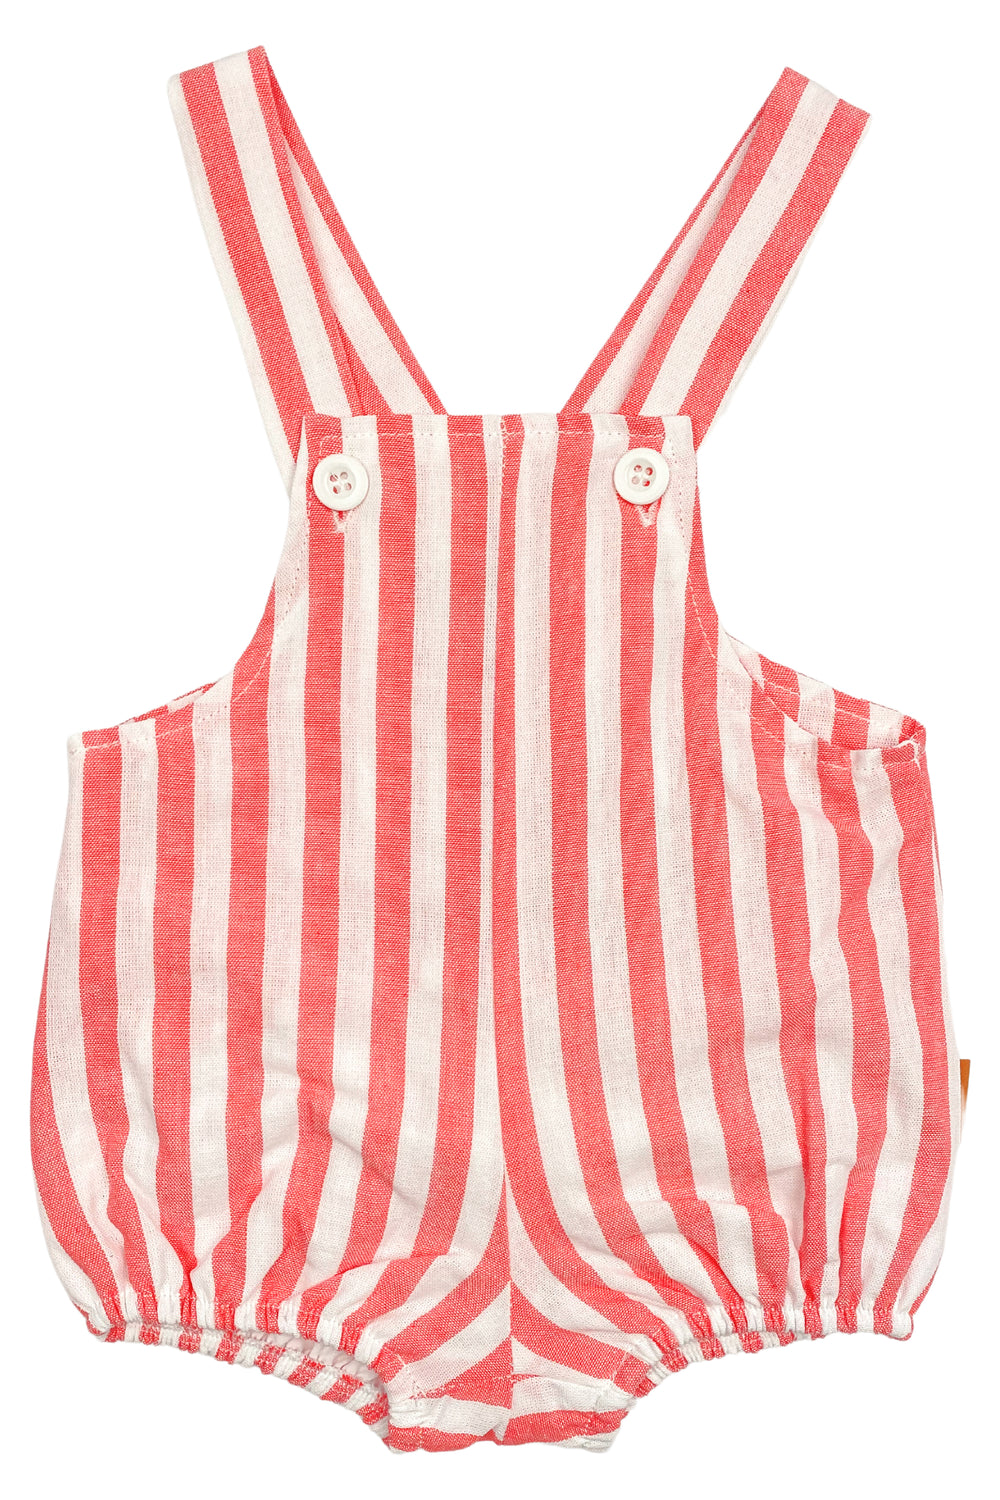 Cocote "Julian" Striped Dungaree Romper | iphoneandroidapplications